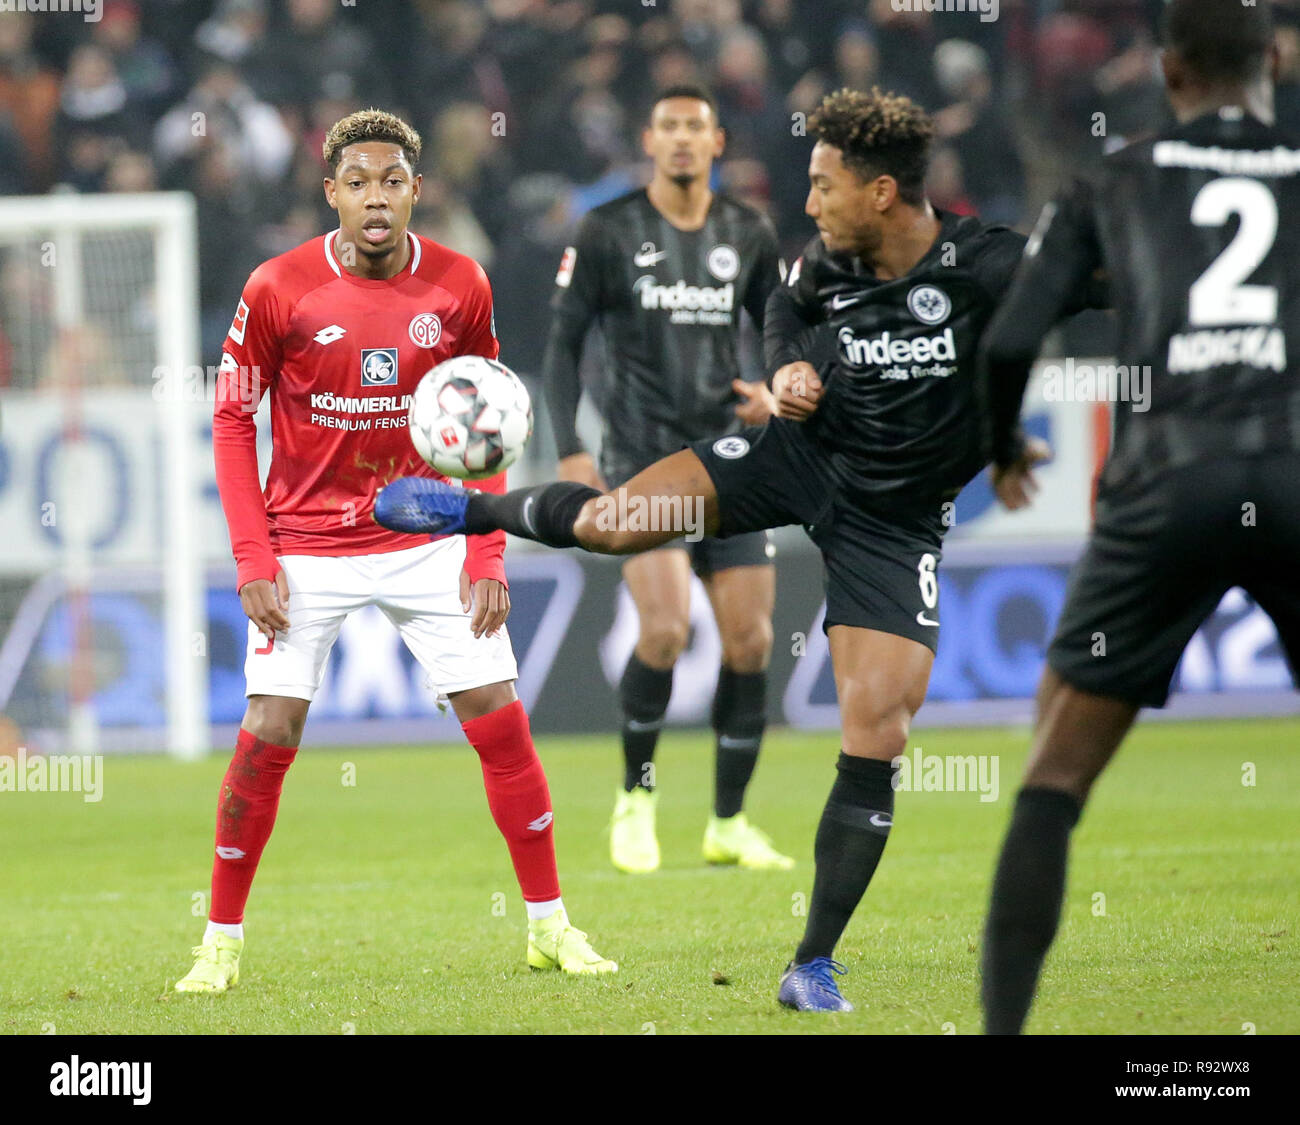 Mainz, Germany. 19th Dec, 2018. Soccer: Bundesliga, FSV Mainz 05 - Eintracht Frankfurt, 16th matchday, in the Opel Arena. Jean-Paul Boetius (L) from Mainz in a duel with Jonathan de Guzman (R) from Frankfurt. Credit: Hasan Bratic/dpa - IMPORTANT NOTE: In accordance with the requirements of the DFL Deutsche Fußball Liga or the DFB Deutscher Fußball-Bund, it is prohibited to use or have used photographs taken in the stadium and/or the match in the form of sequence images and/or video-like photo sequences./dpa/Alamy Live News Stock Photo